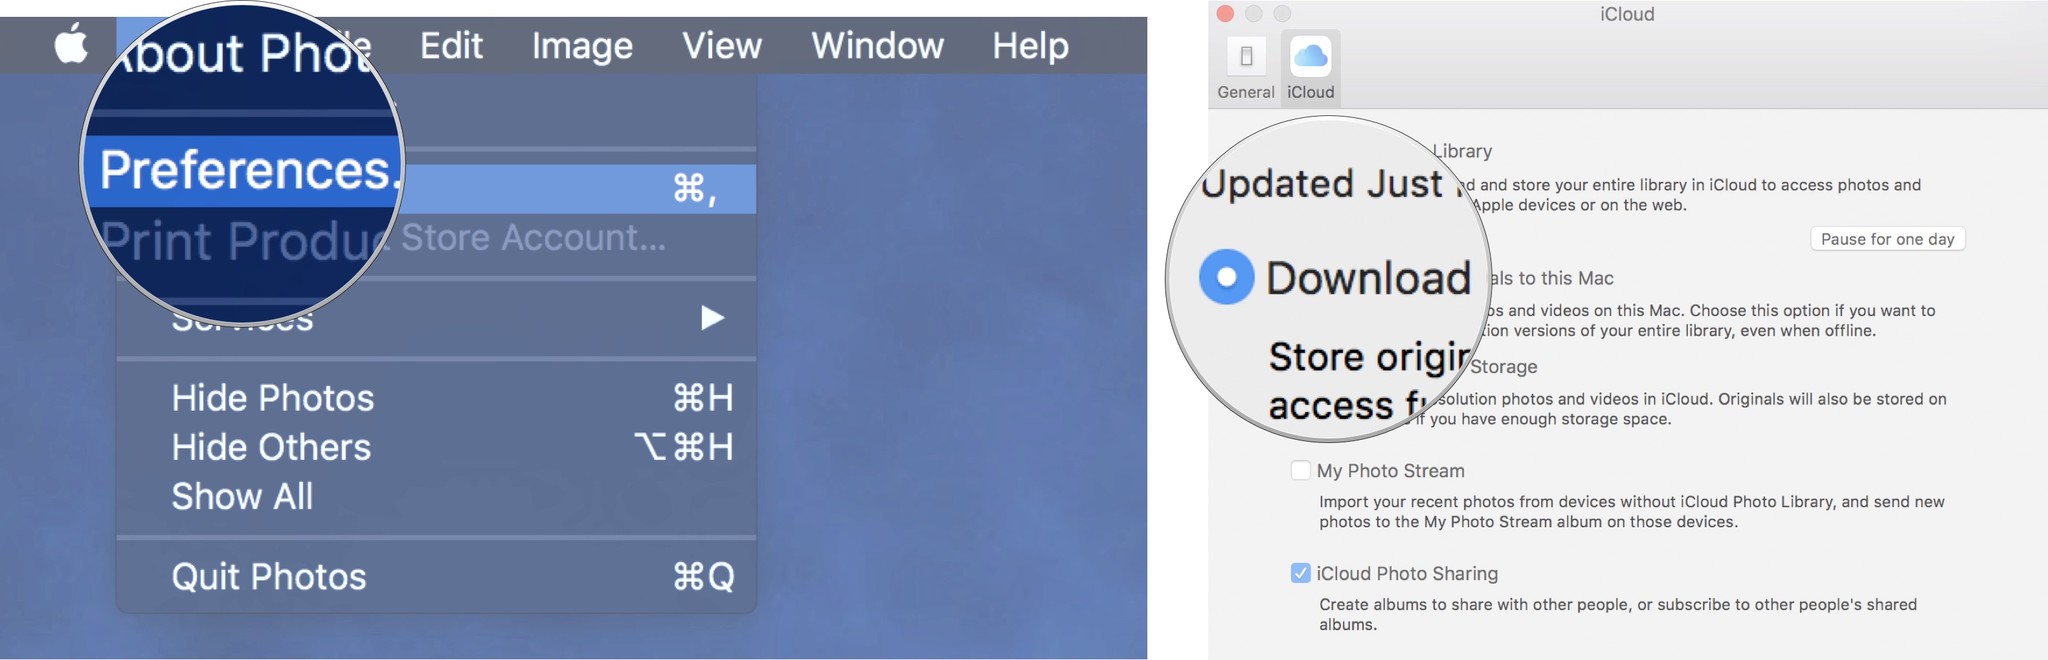 Select Preferences, then click Download to this Mac